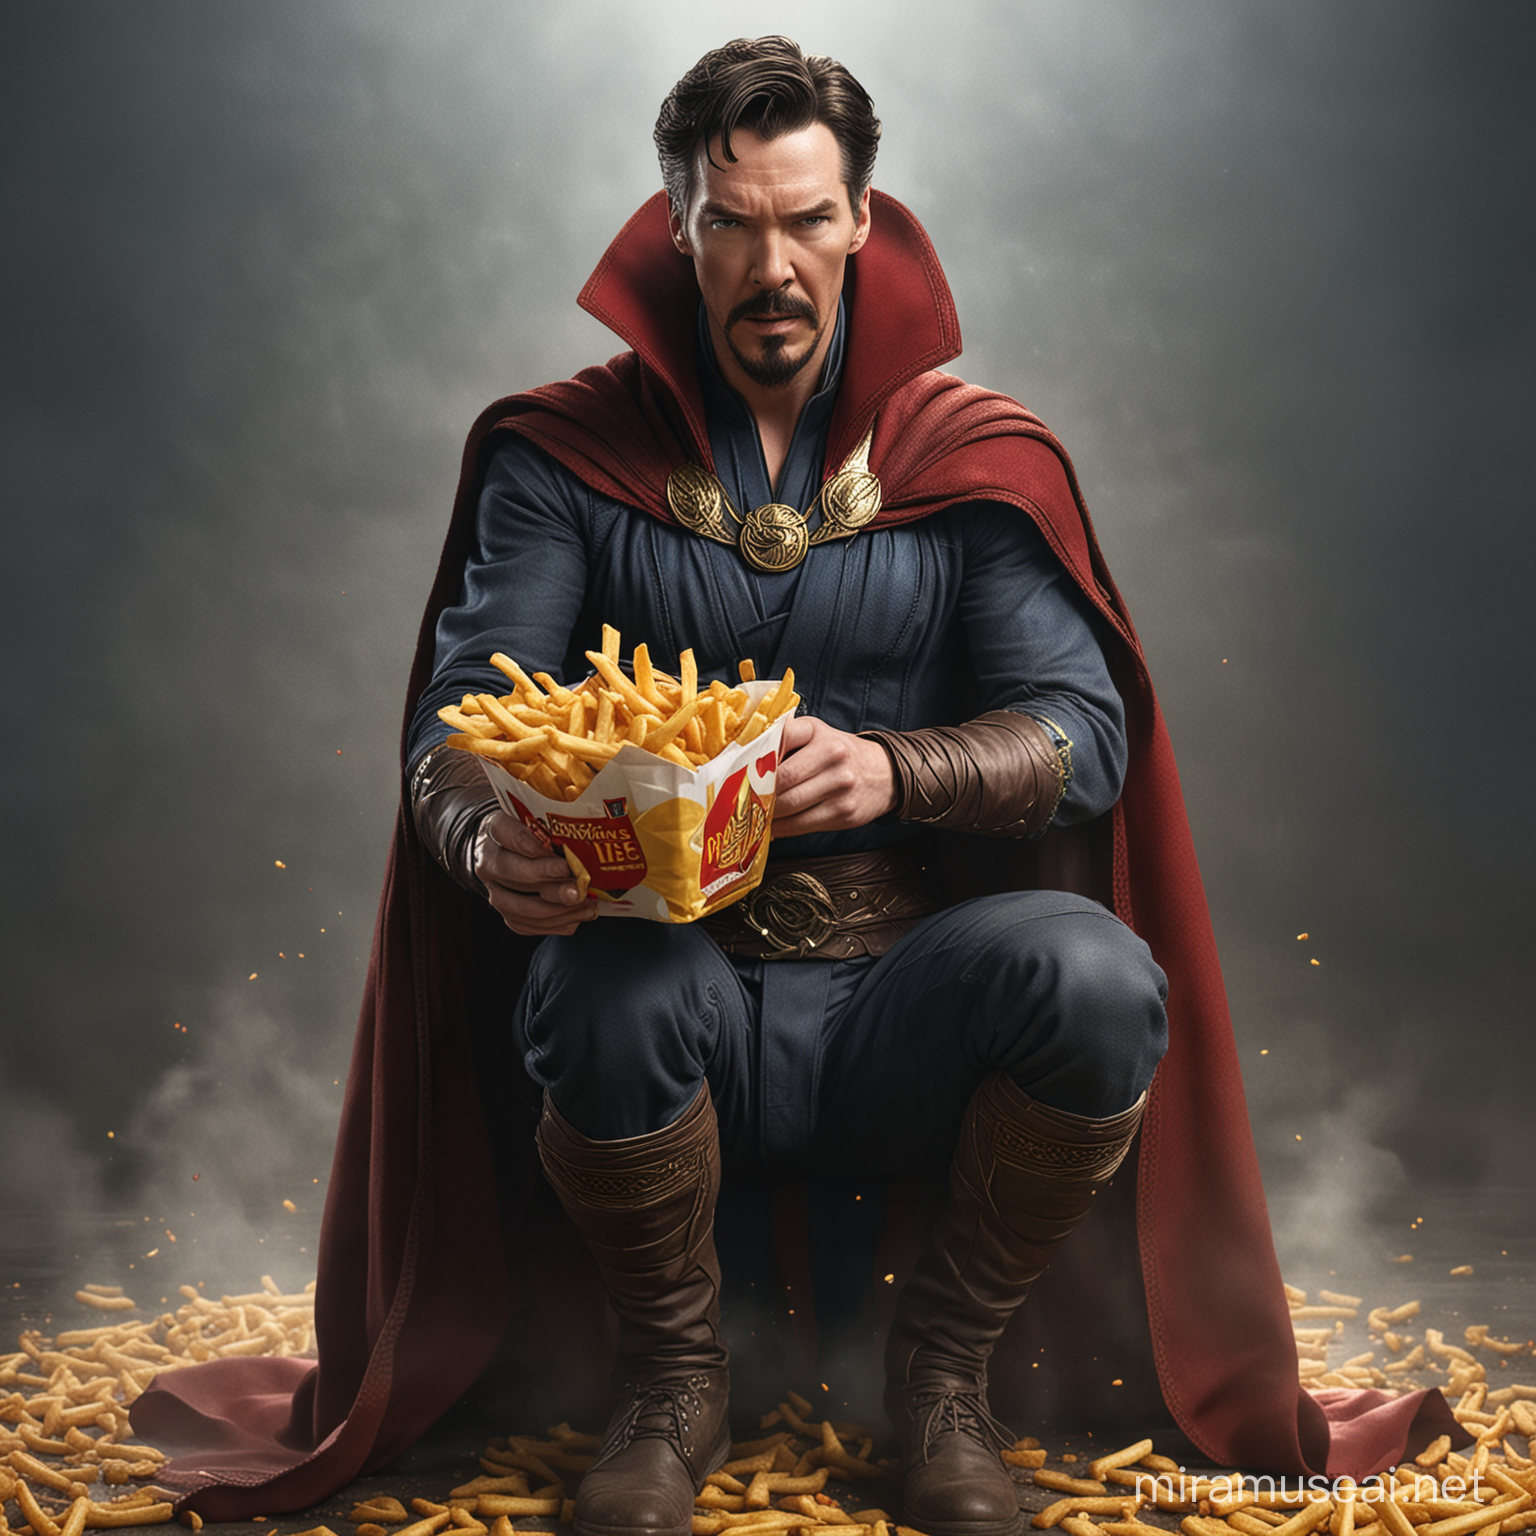 dr. strange in full body stuffing his face with mc donalds french fries while fighting 
